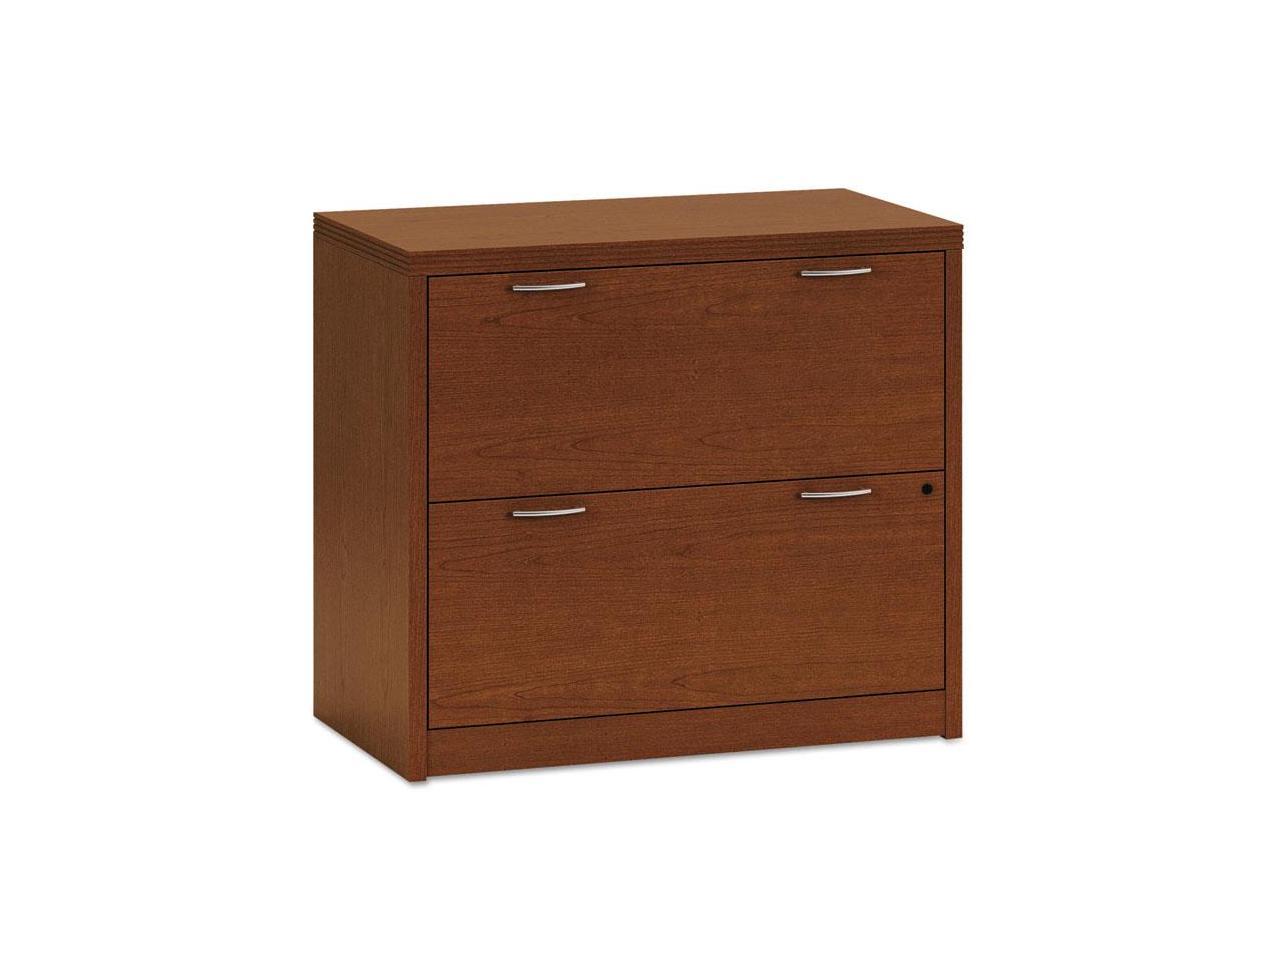 HON Valido 2-Drawer Lateral File, 36"W - image 2 of 11